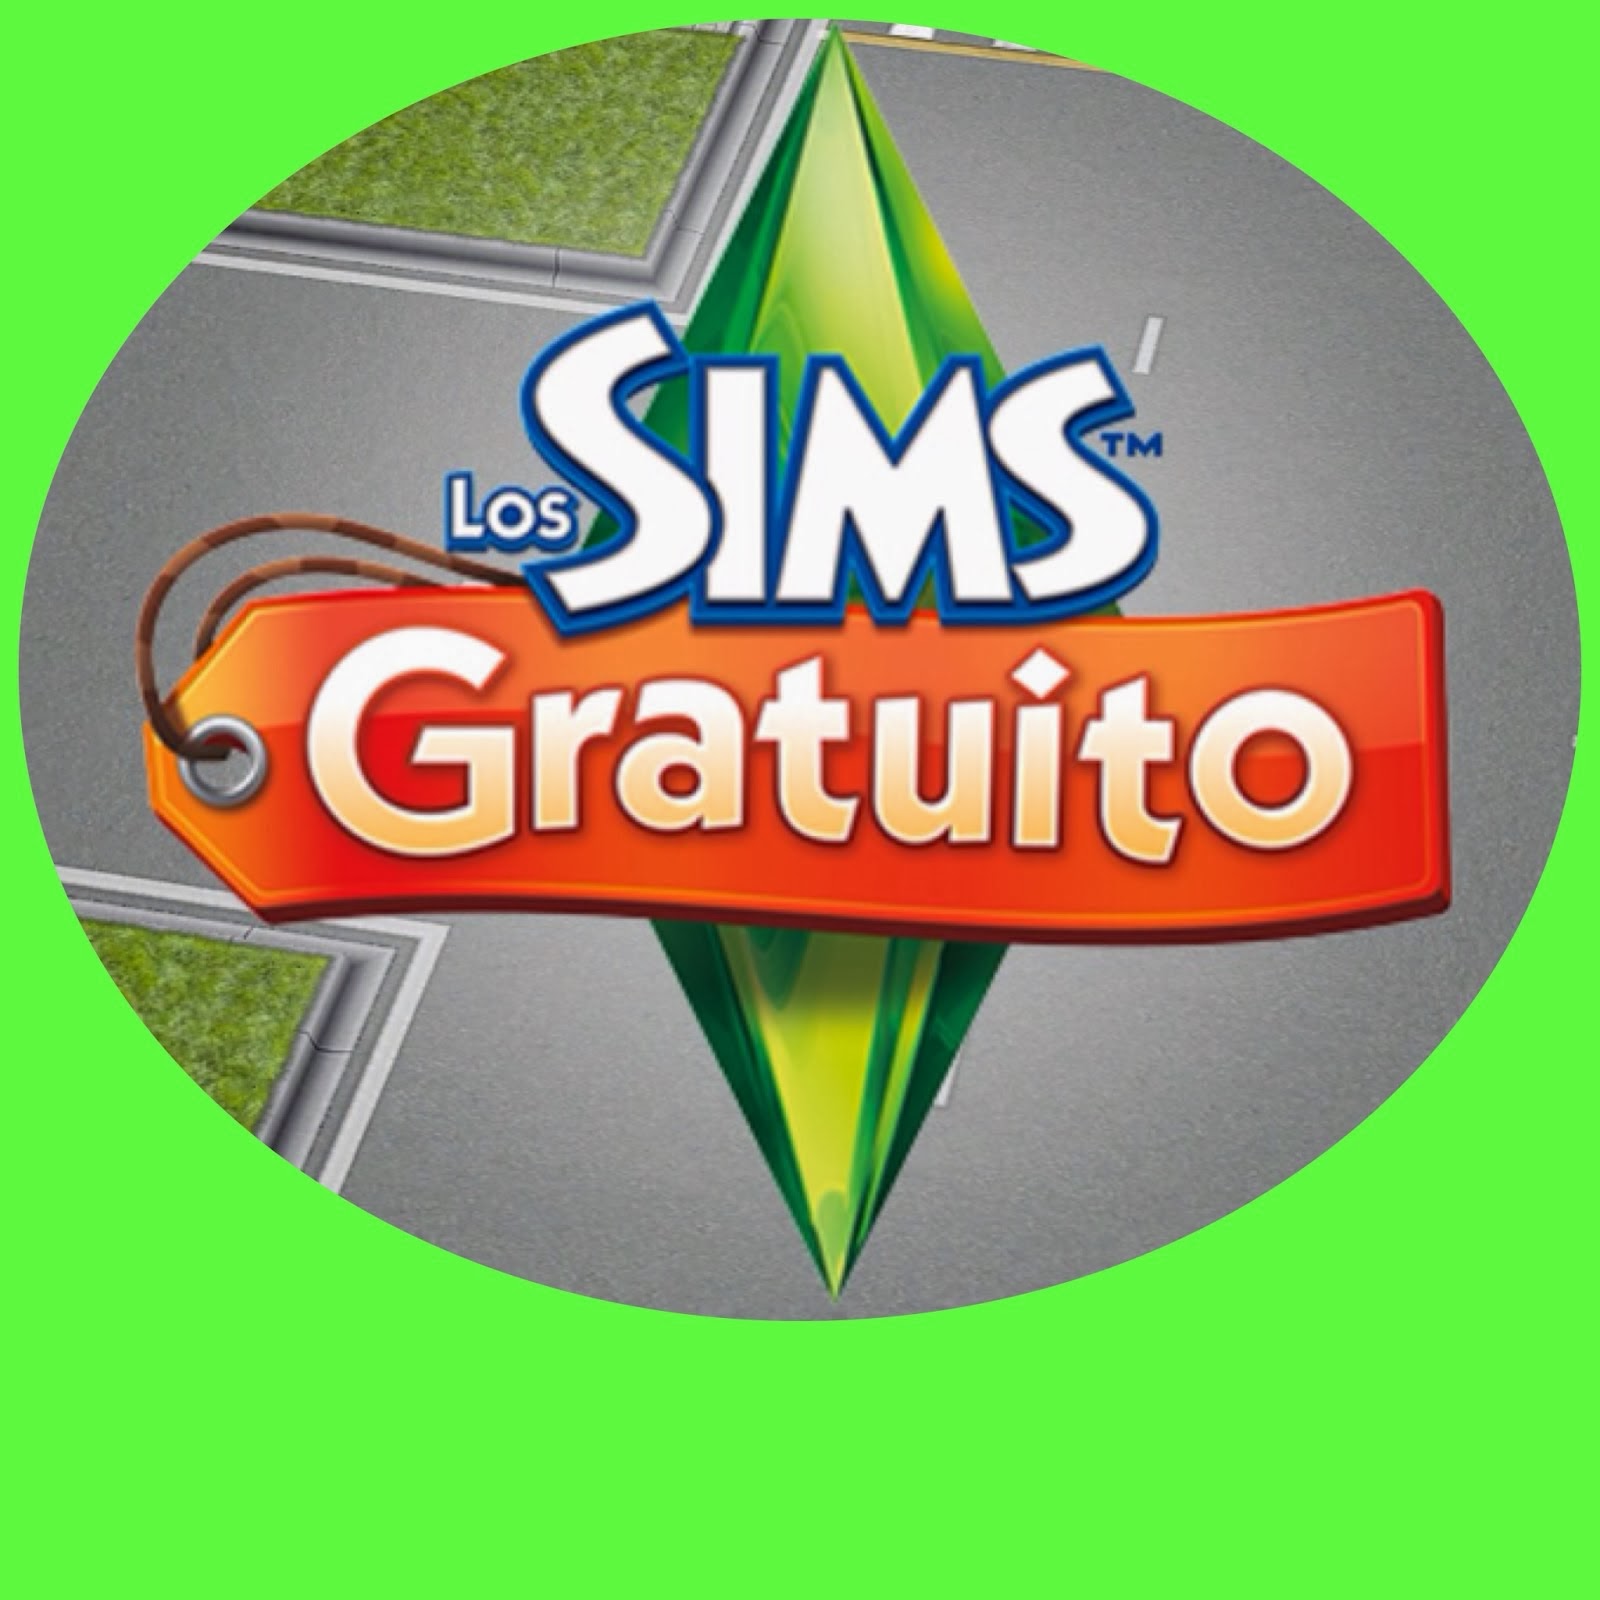 Simmers unidos